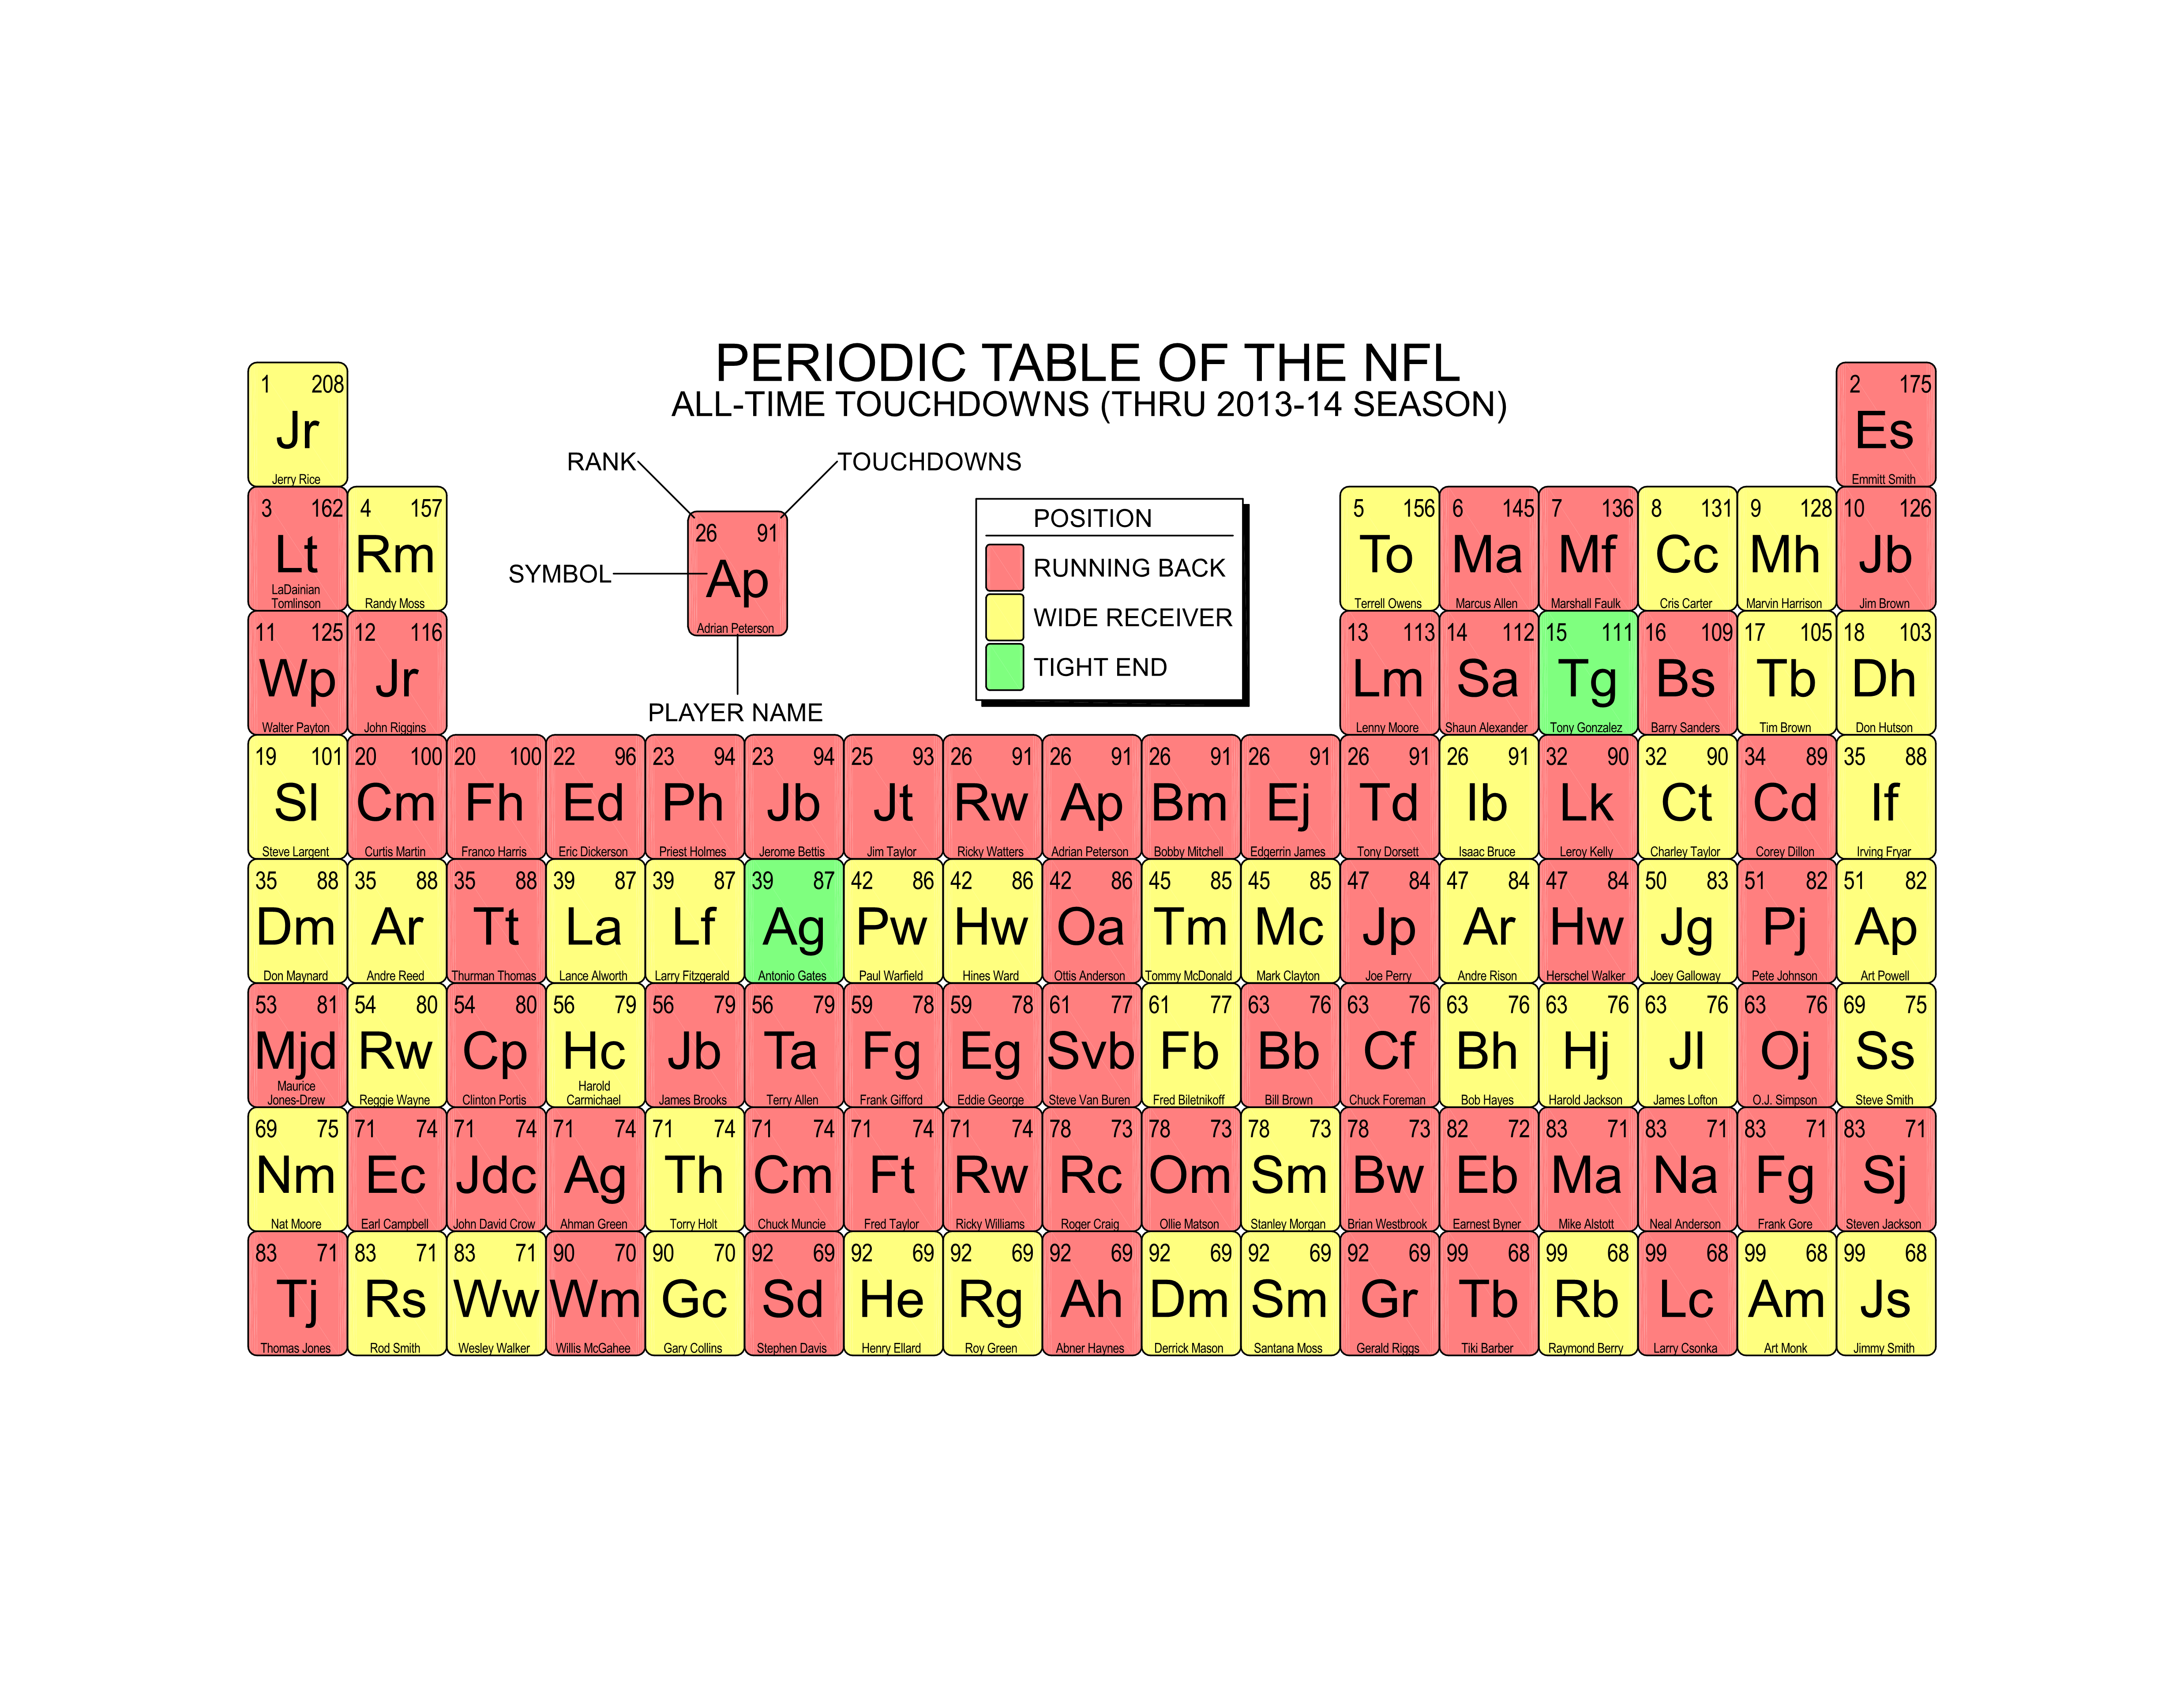 Periodic Table of the NFL